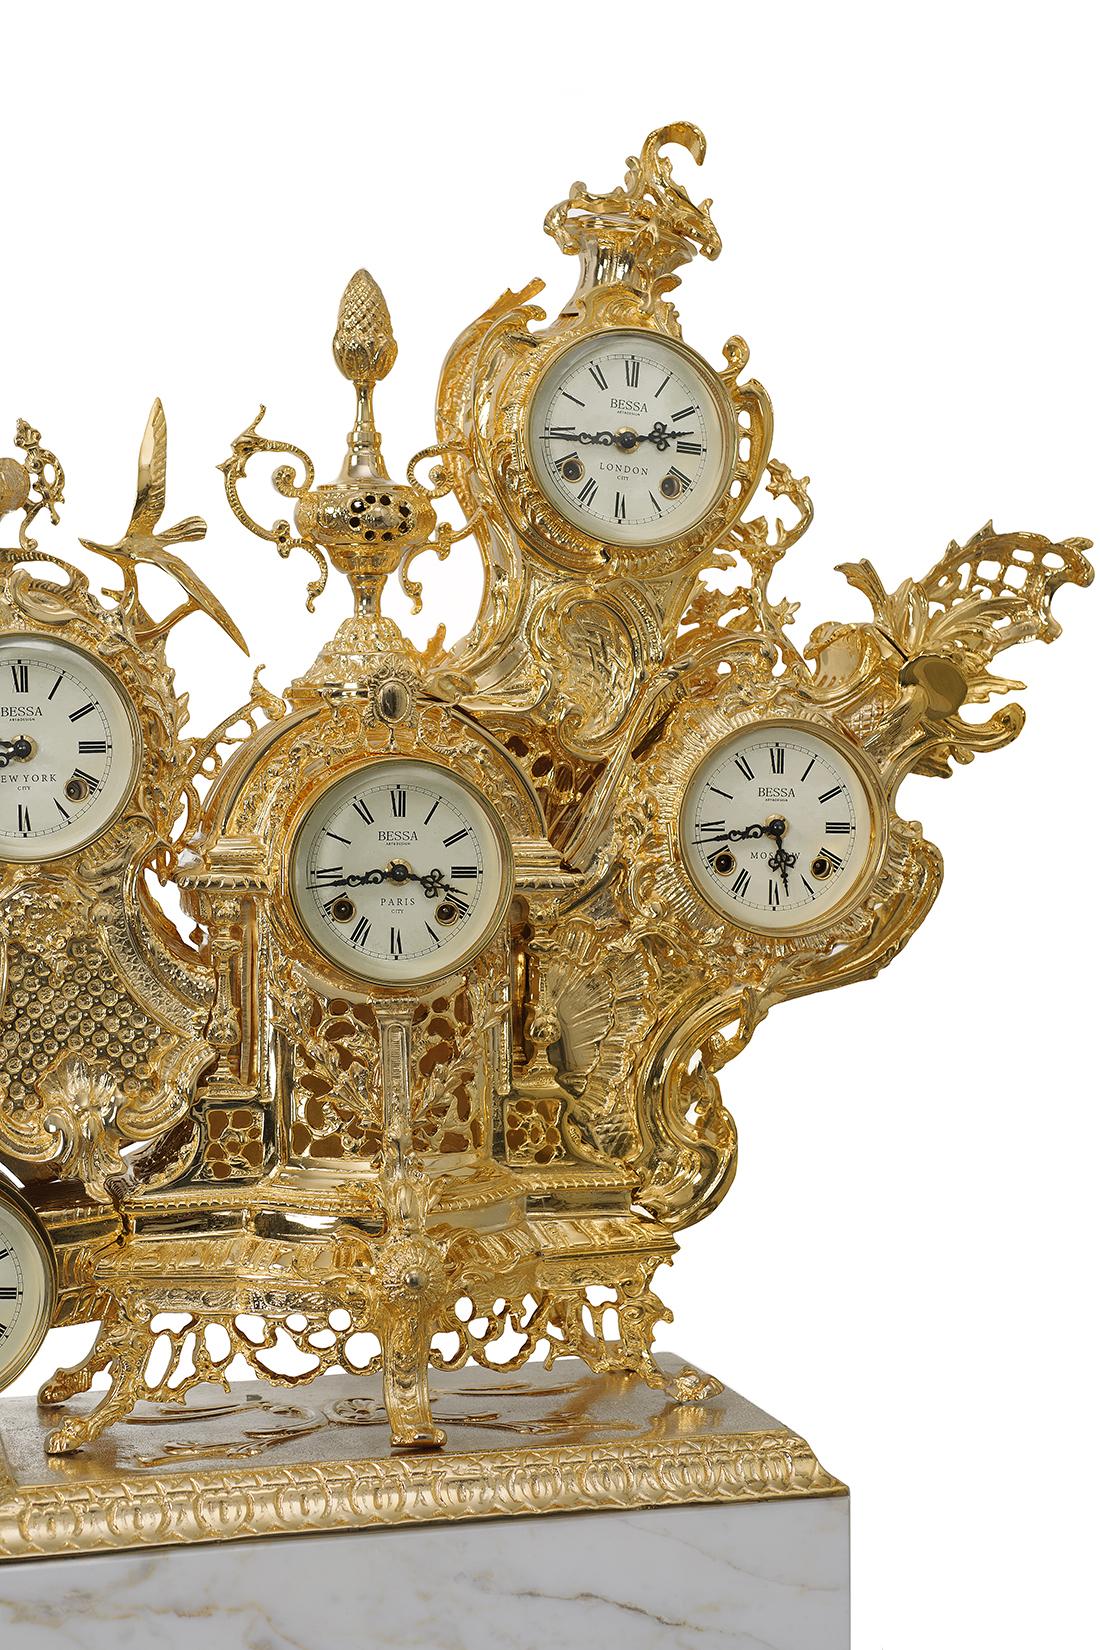 Inspiration:  
This is a piece marked by great sentimental value because it is inspired by the grandfather’s tender figure and his old clocks that accompanied our childhood. This unique piece adds a classic and classy touch to our modern spaces. The